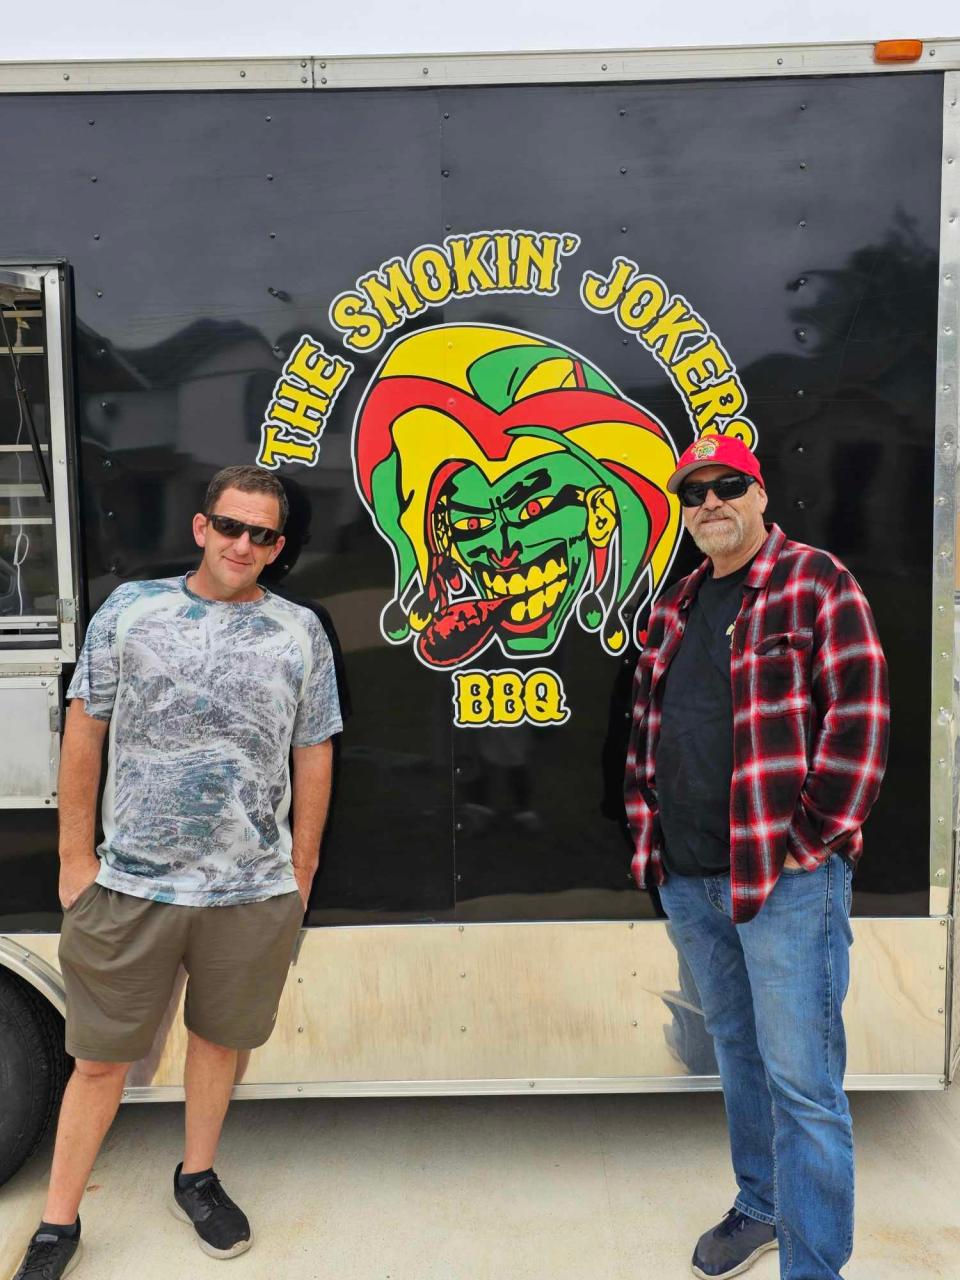 A new wave of food trailers and trucks have rolled into the Pensacola area, including The Smokin' Jokers BBQ.